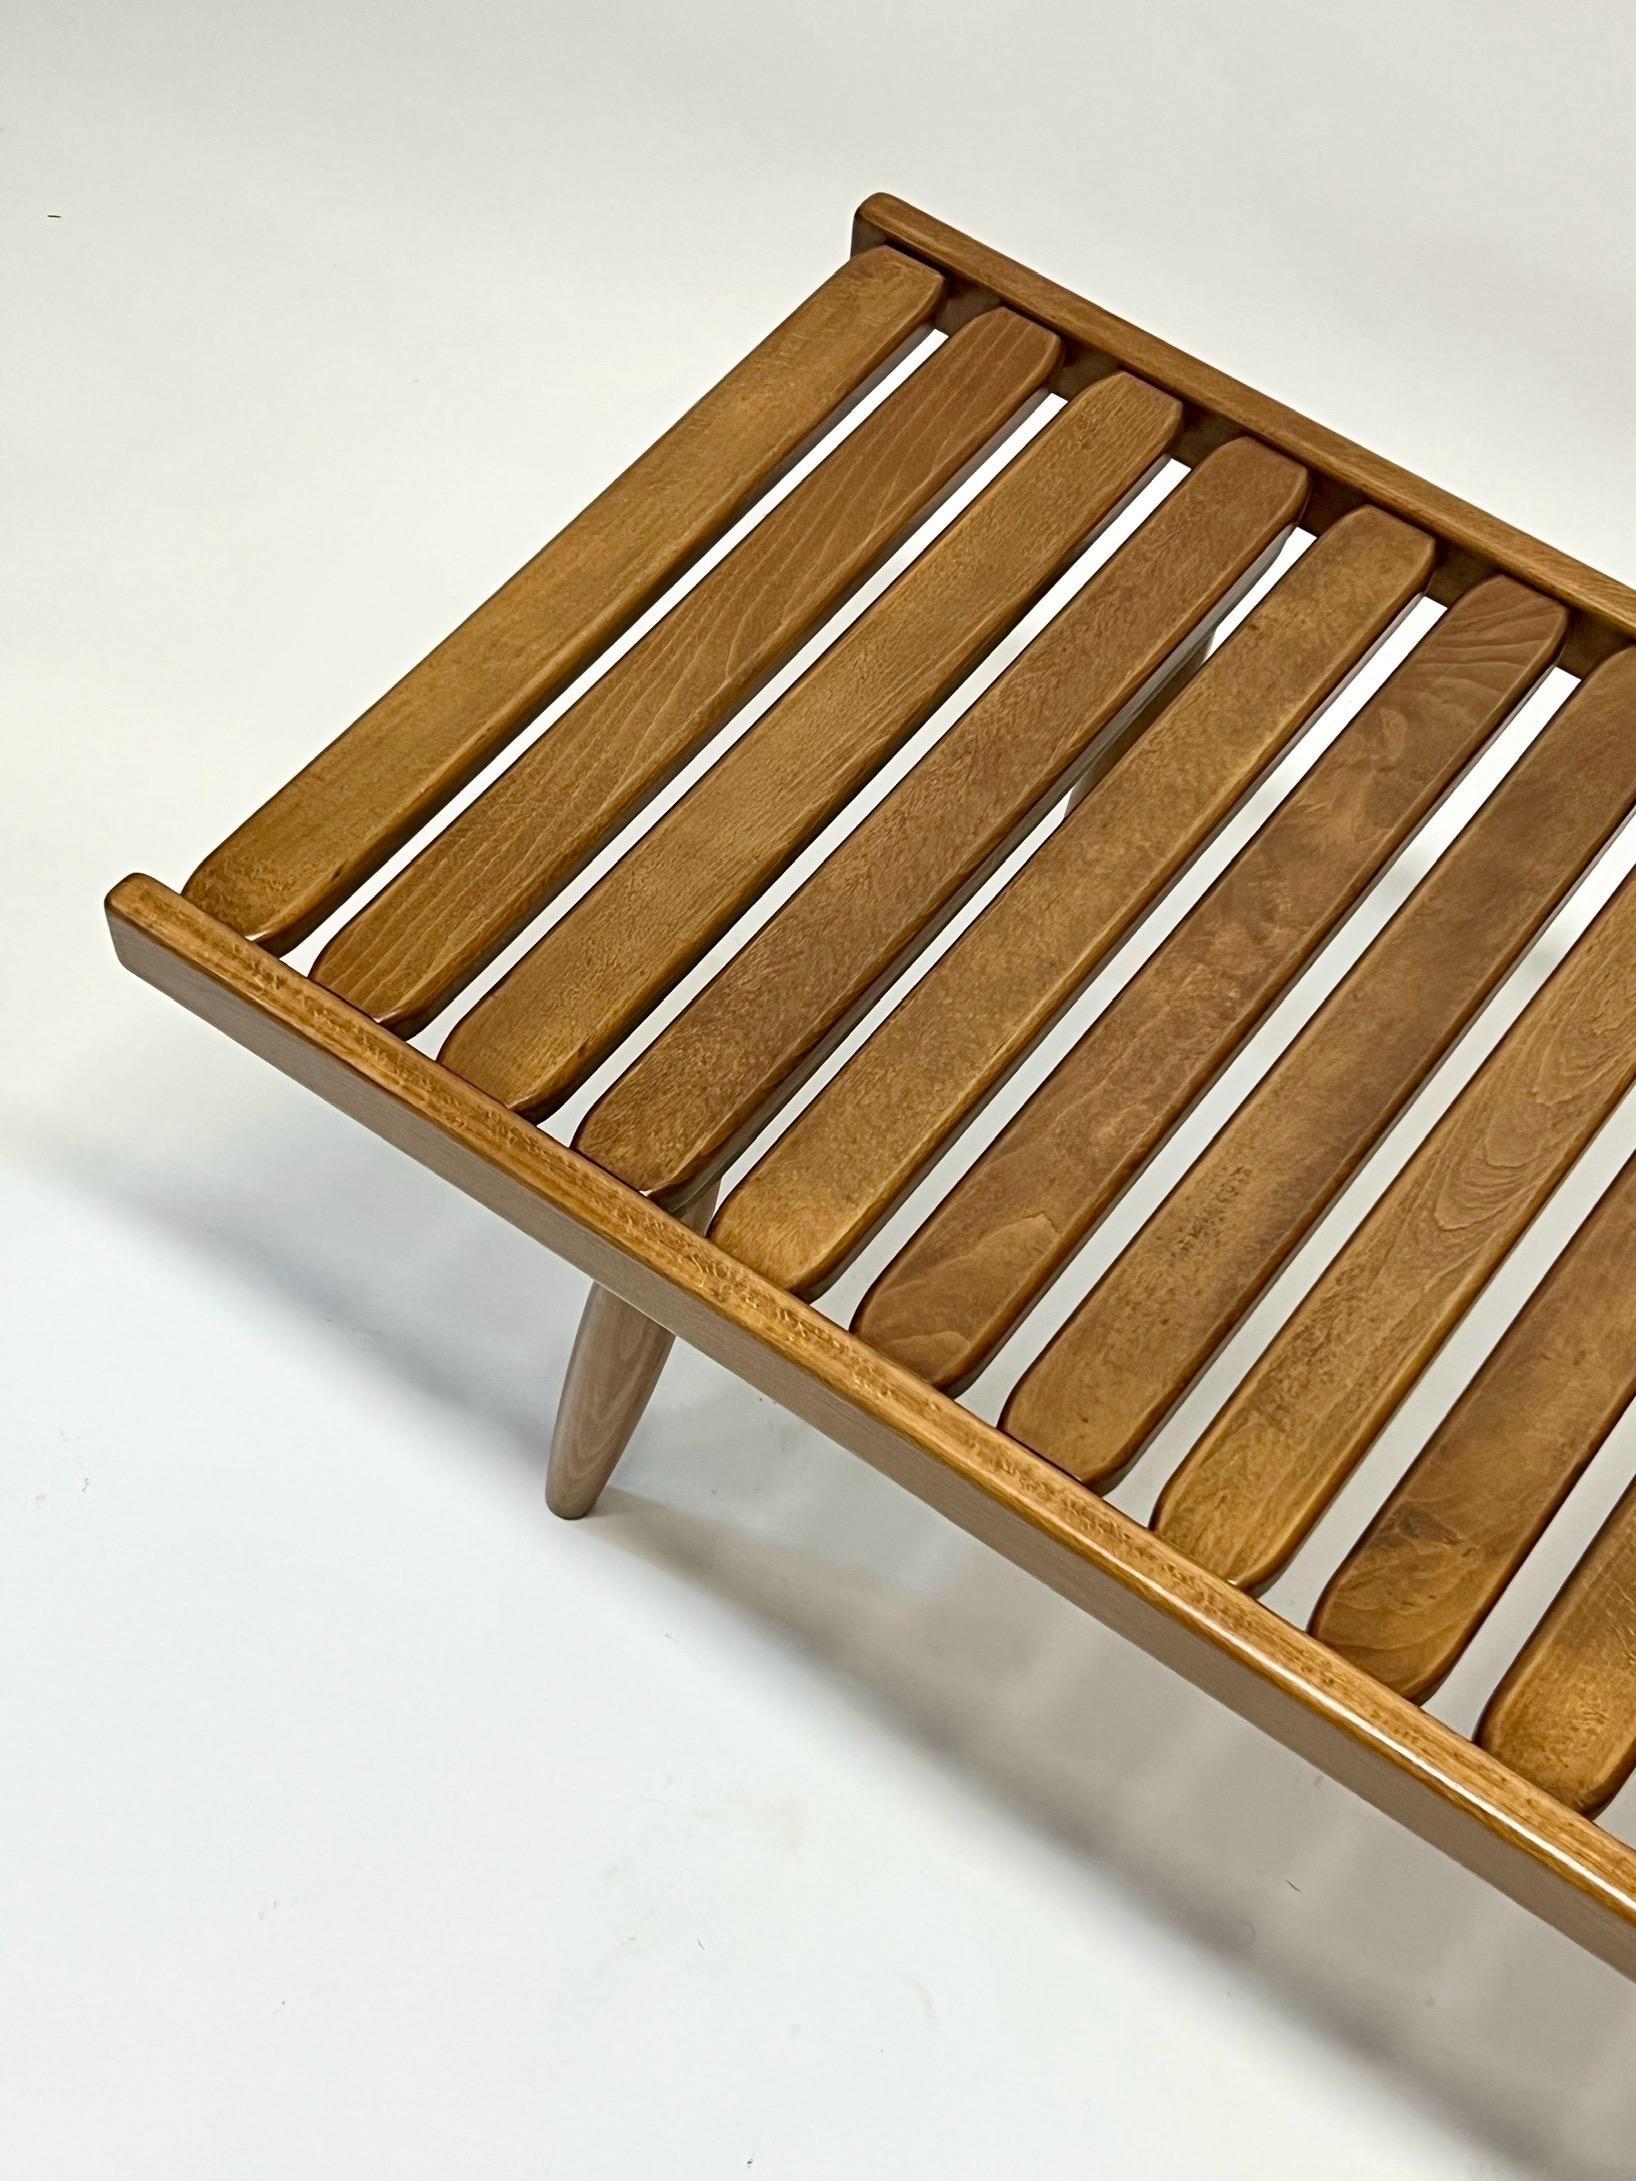 Vintage Japanese Wood Slat Coffee Table c1960s In Excellent Condition For Sale In Oakland, CA